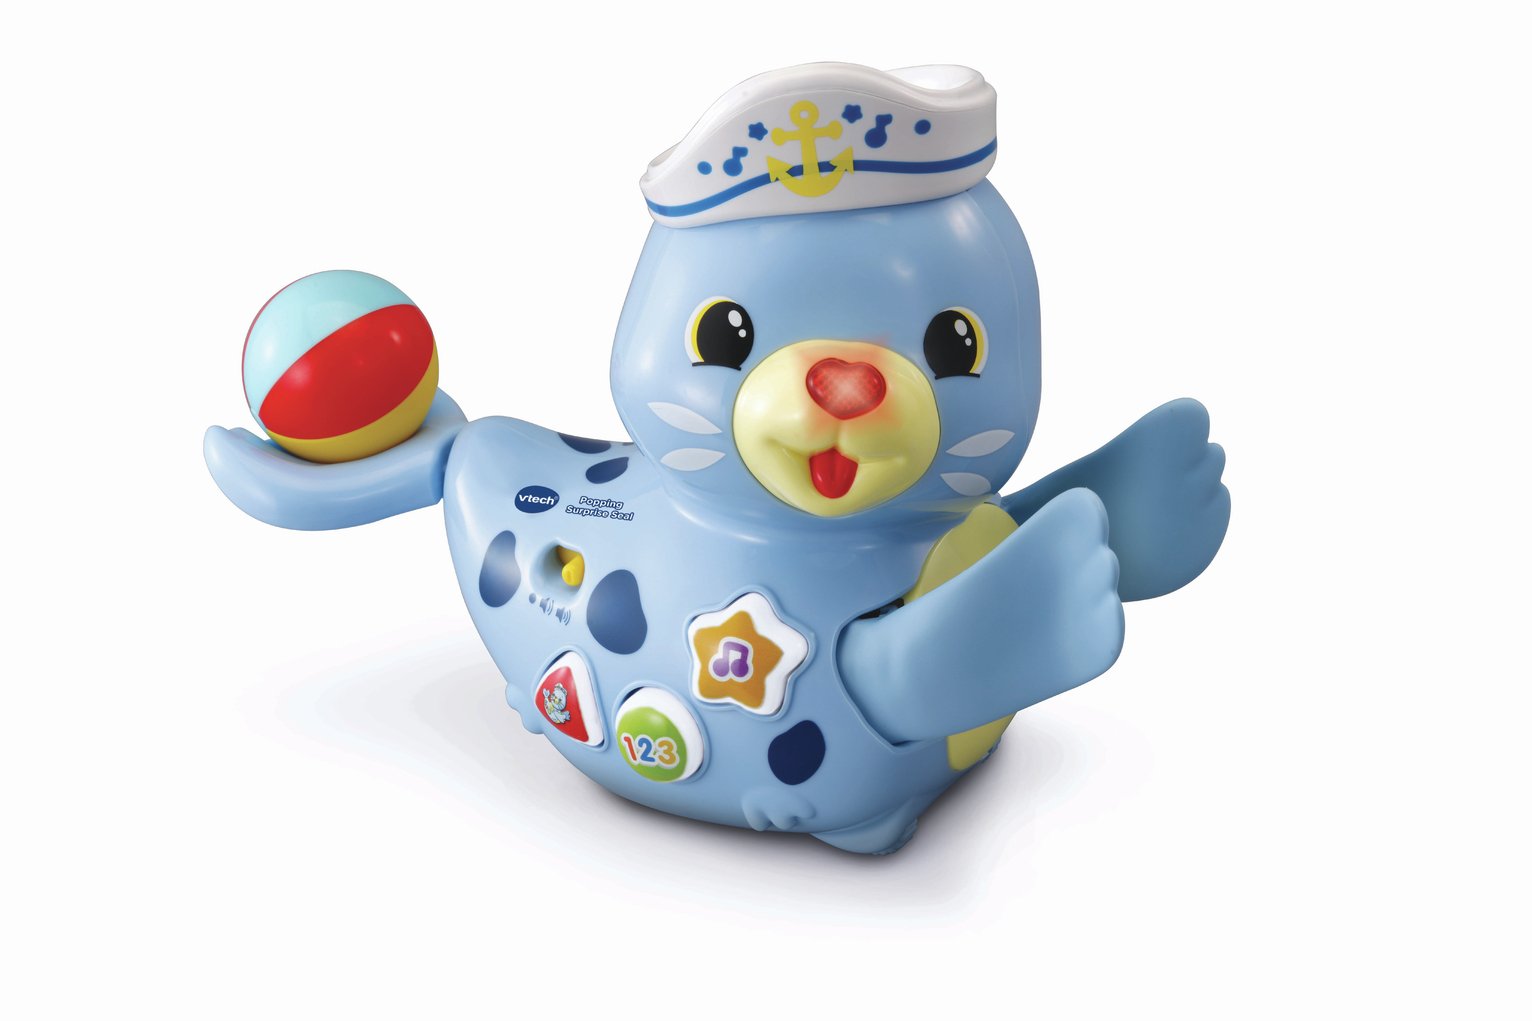 VTech Surprise Seal Activity Toy Review